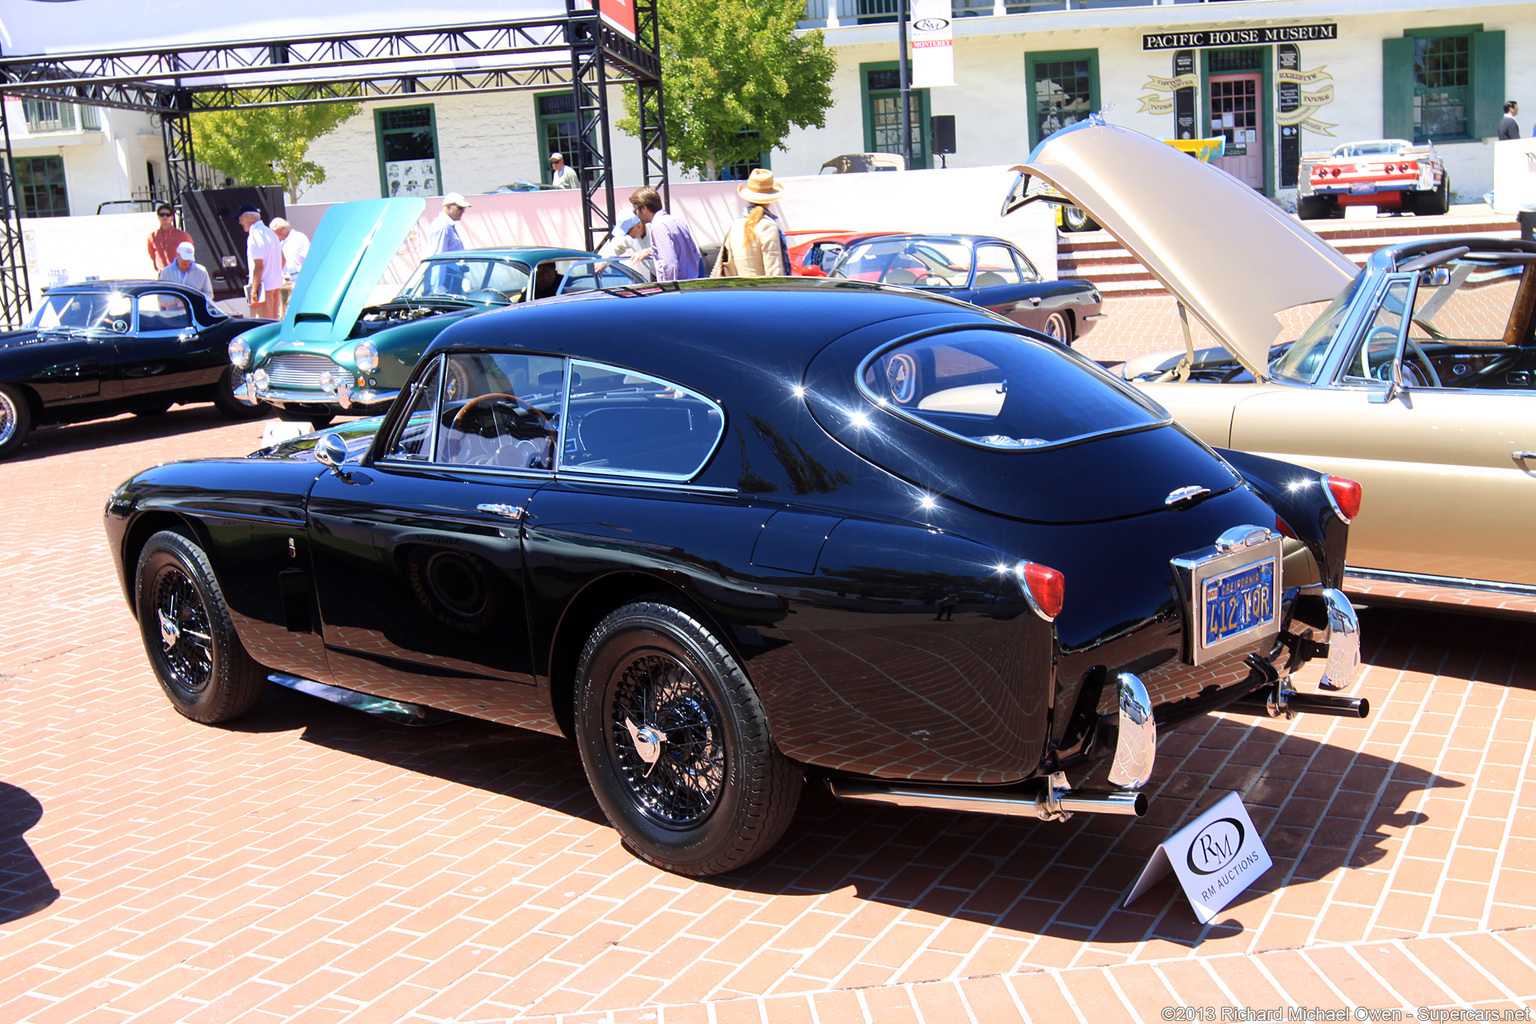 2013 Monterey Auction by RM Auctions